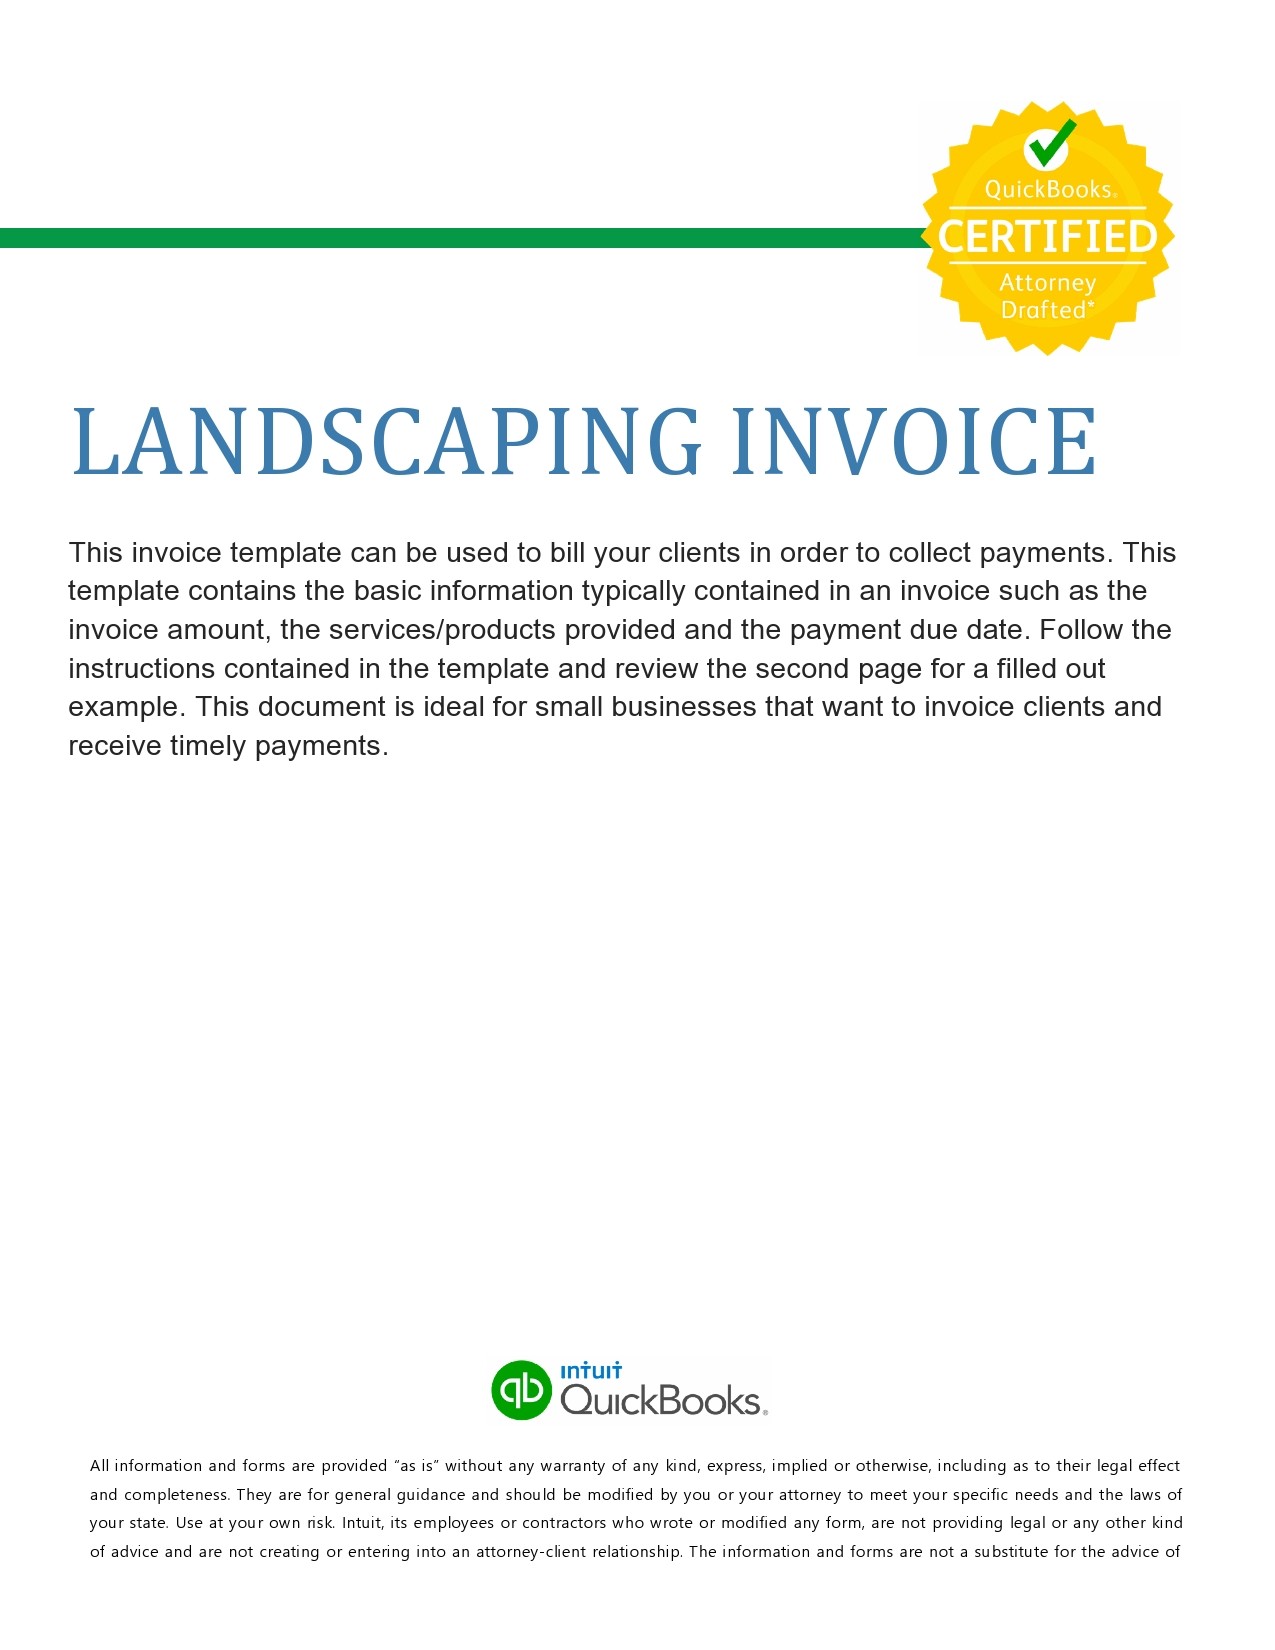 Free landscaping invoice 31